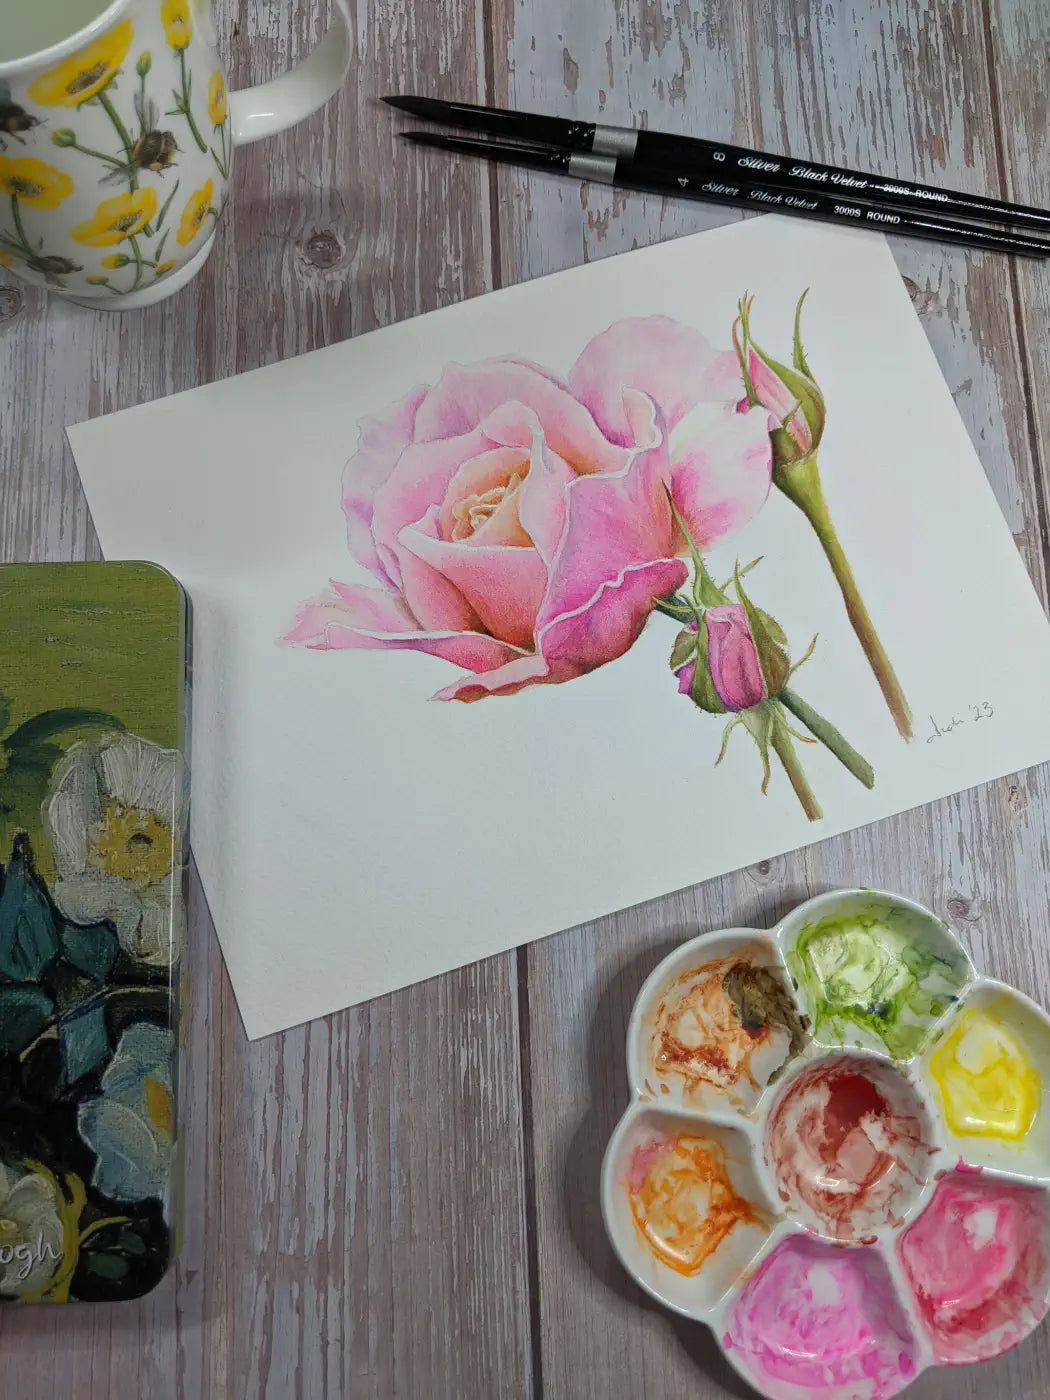 watercolour painting of a rose with art supplies